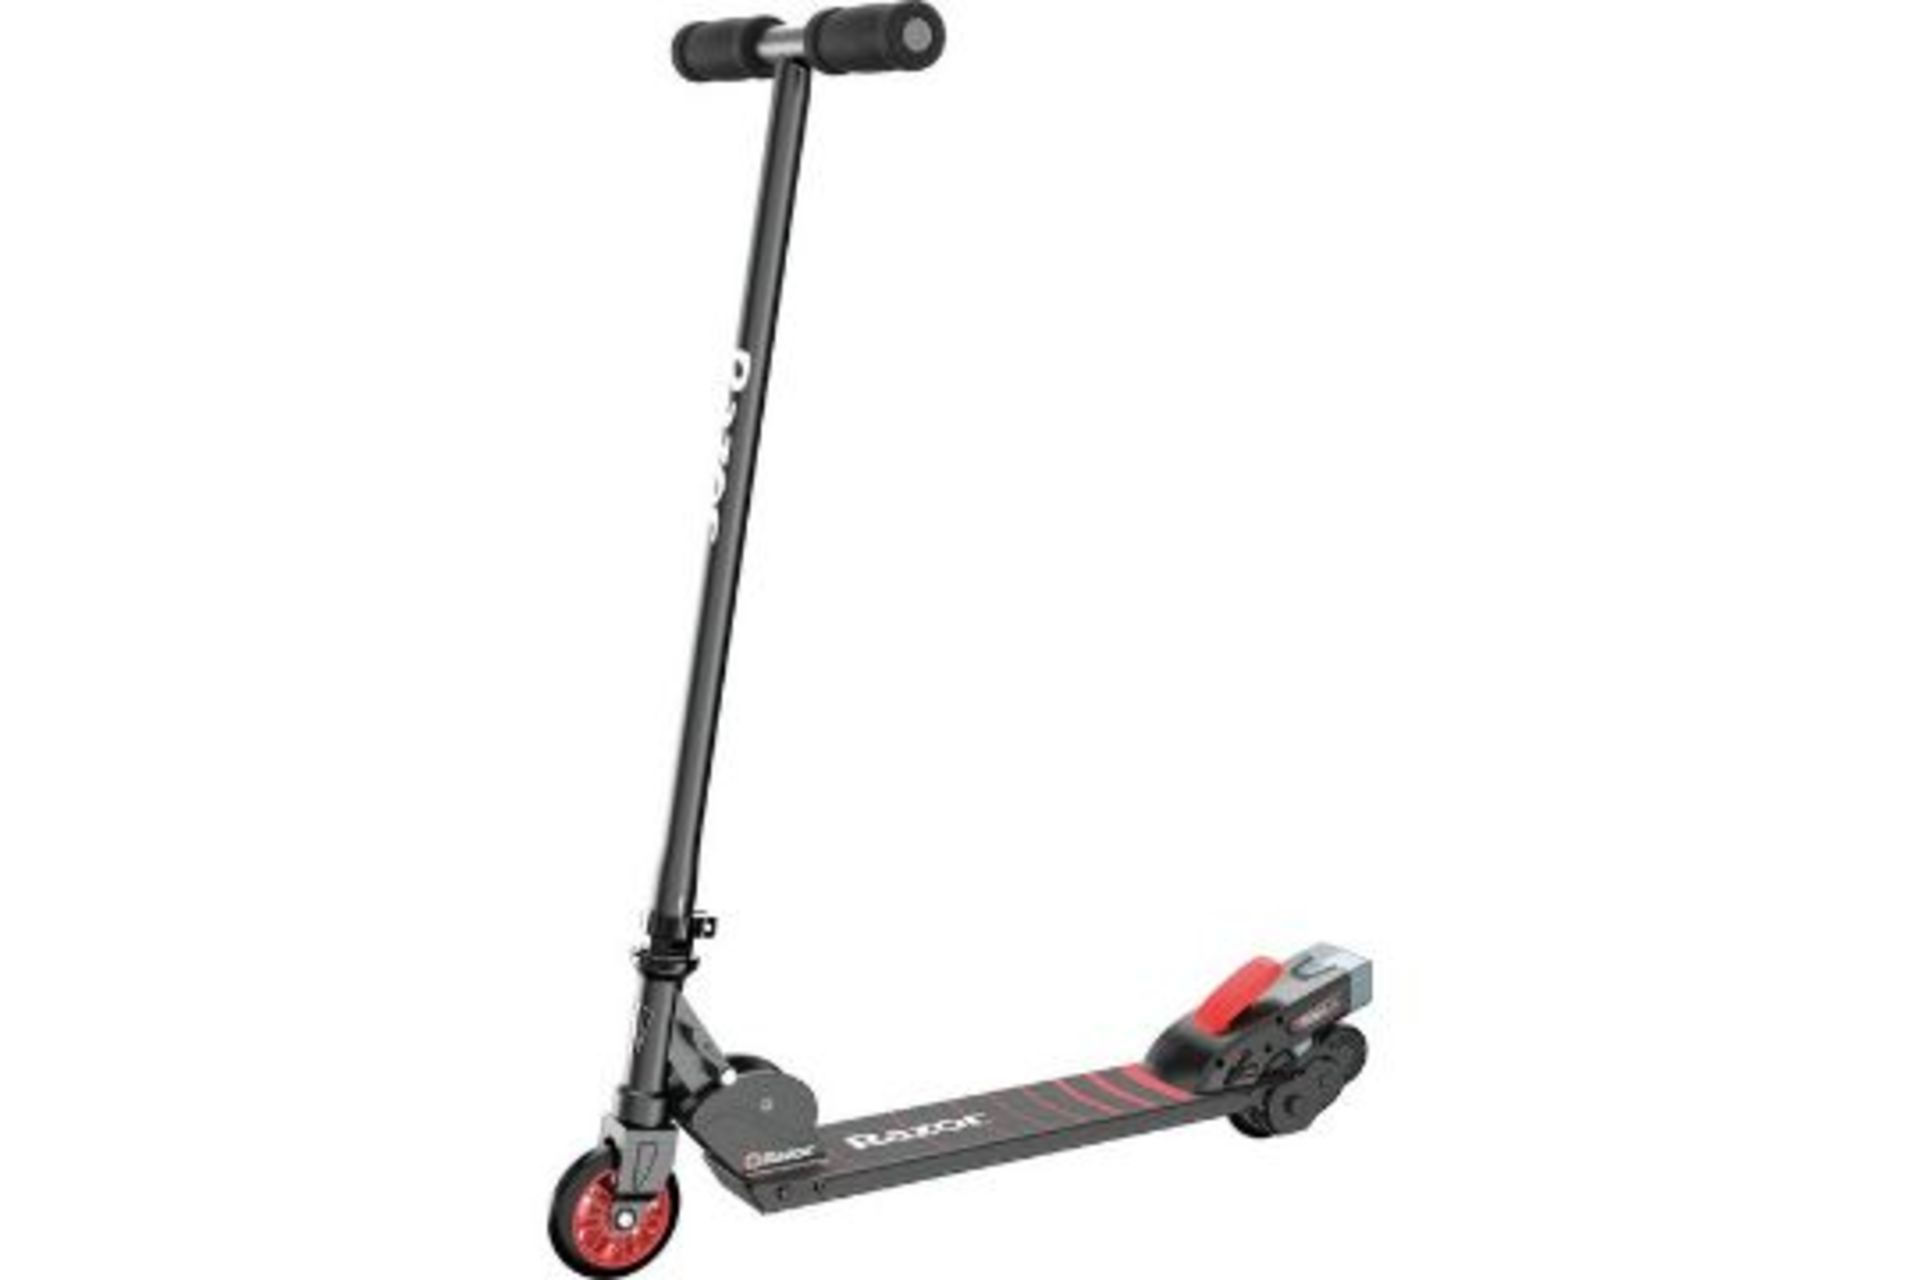 Razor Turbo A Black Label Electric Scooter RRP £175.00. - AO Simply step on and kick off to activate